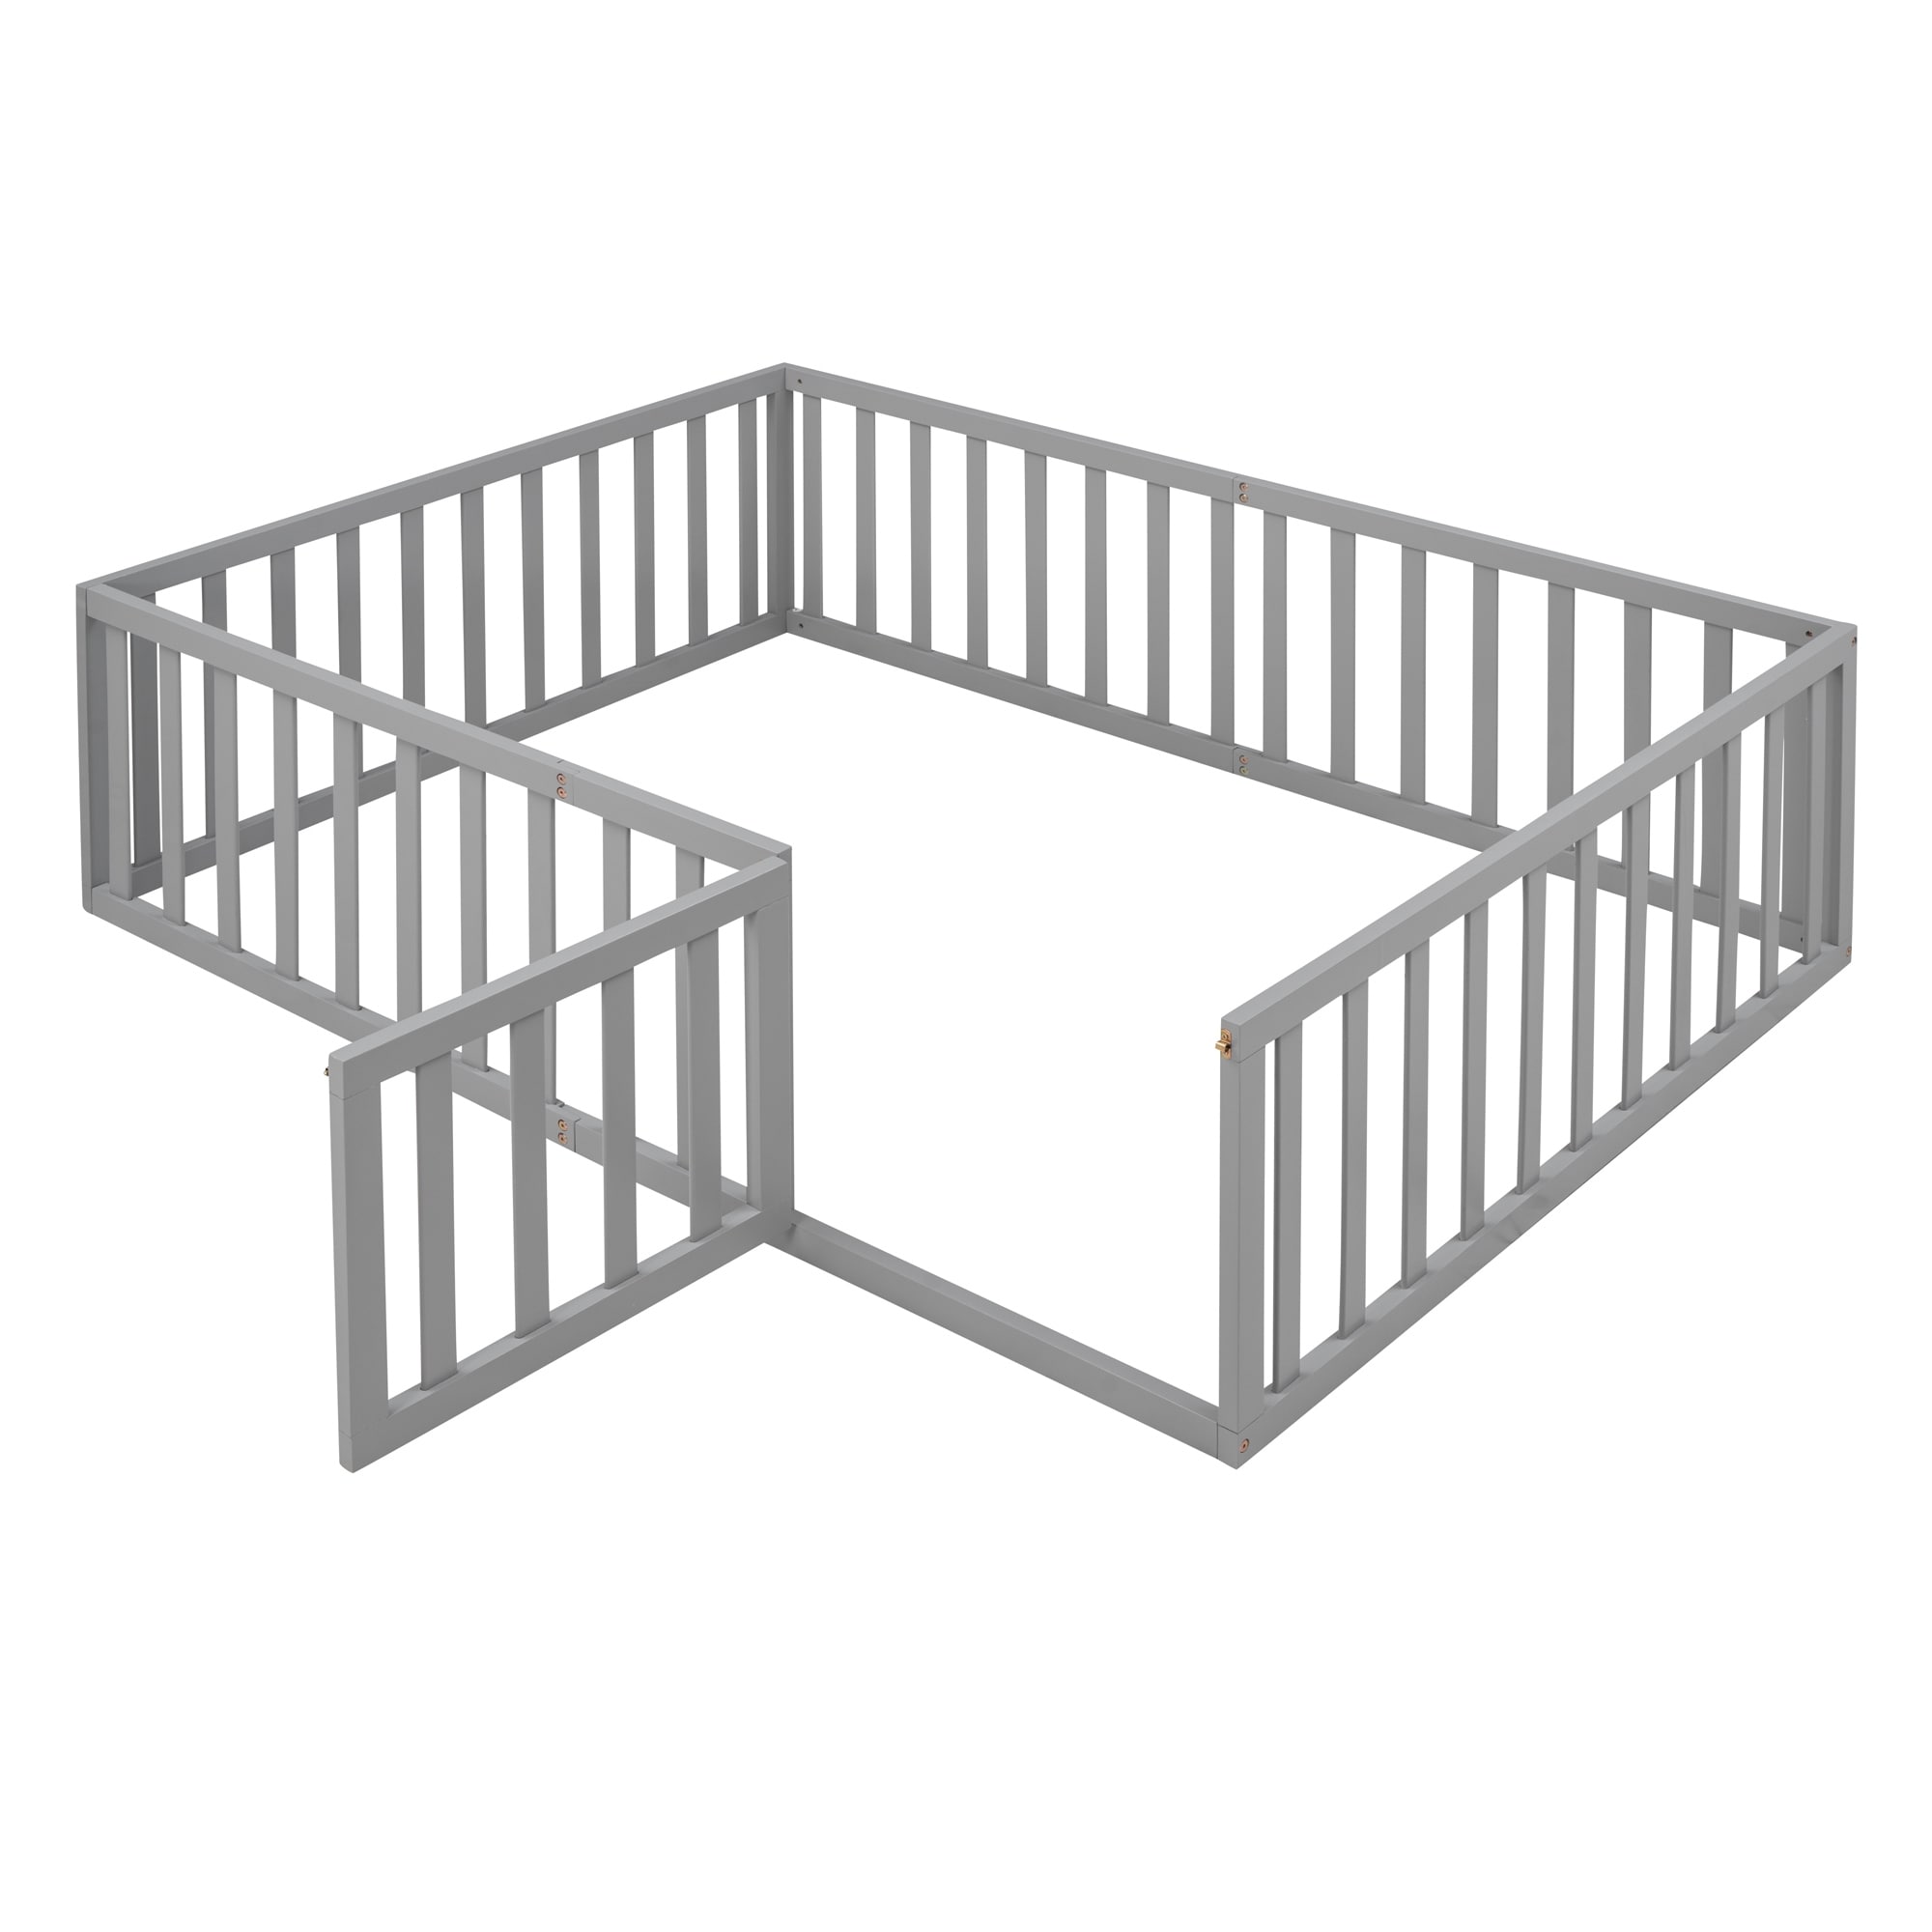 Gray Wood Full Size Daybed Frame: Fence, Artistic Design, Floor Bed